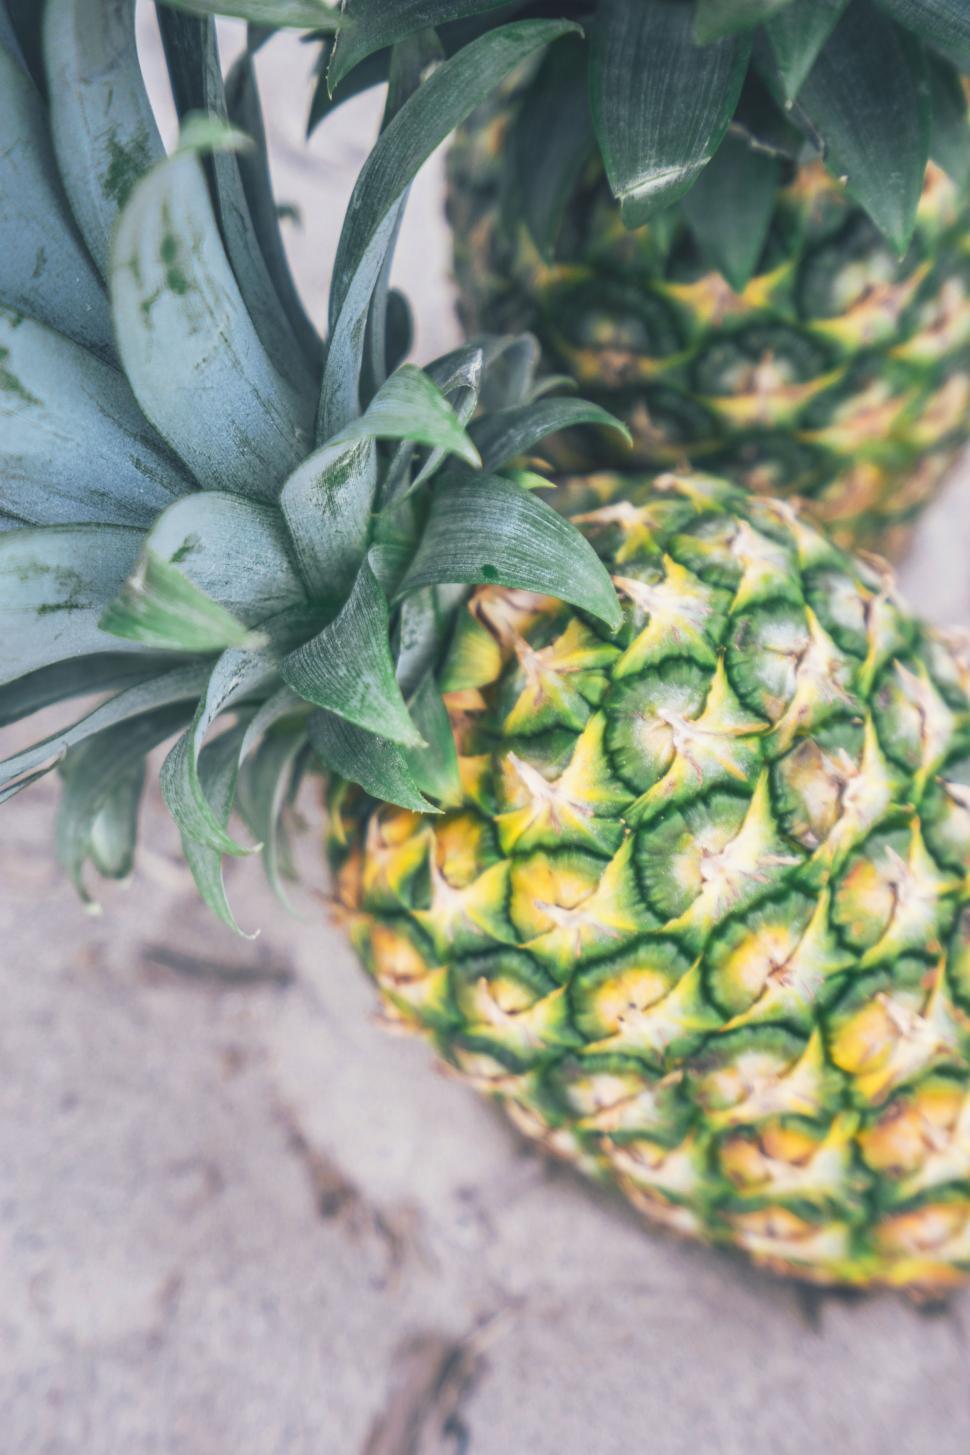 Free Image of Two Pineapples Sitting Together 